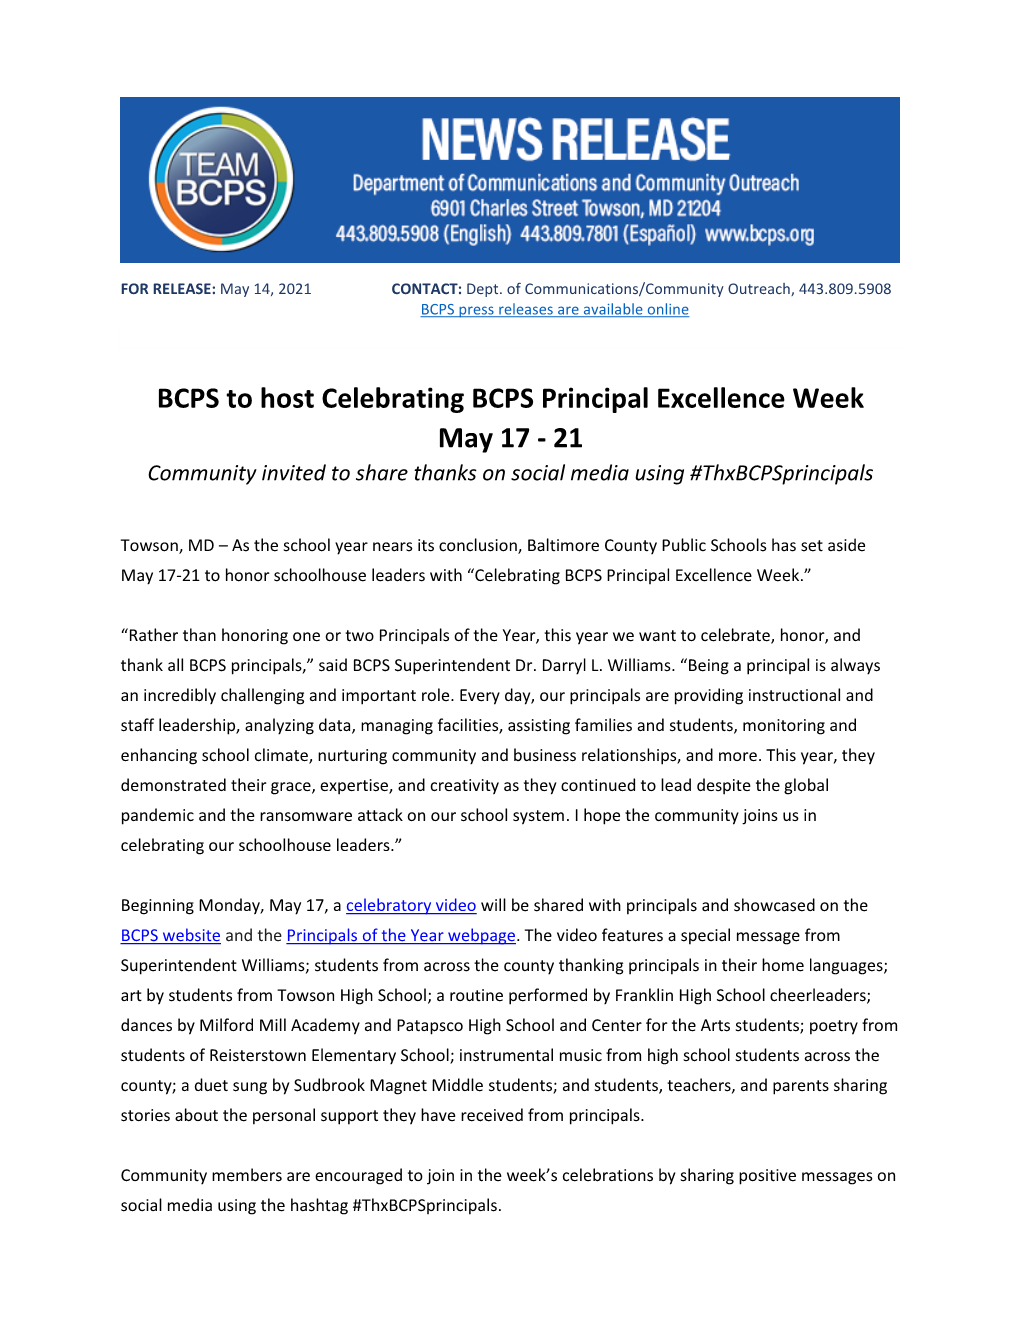 BCPS to Host Celebrating BCPS Principal Excellence Week May 17 - 21 Community Invited to Share Thanks on Social Media Using #Thxbcpsprincipals